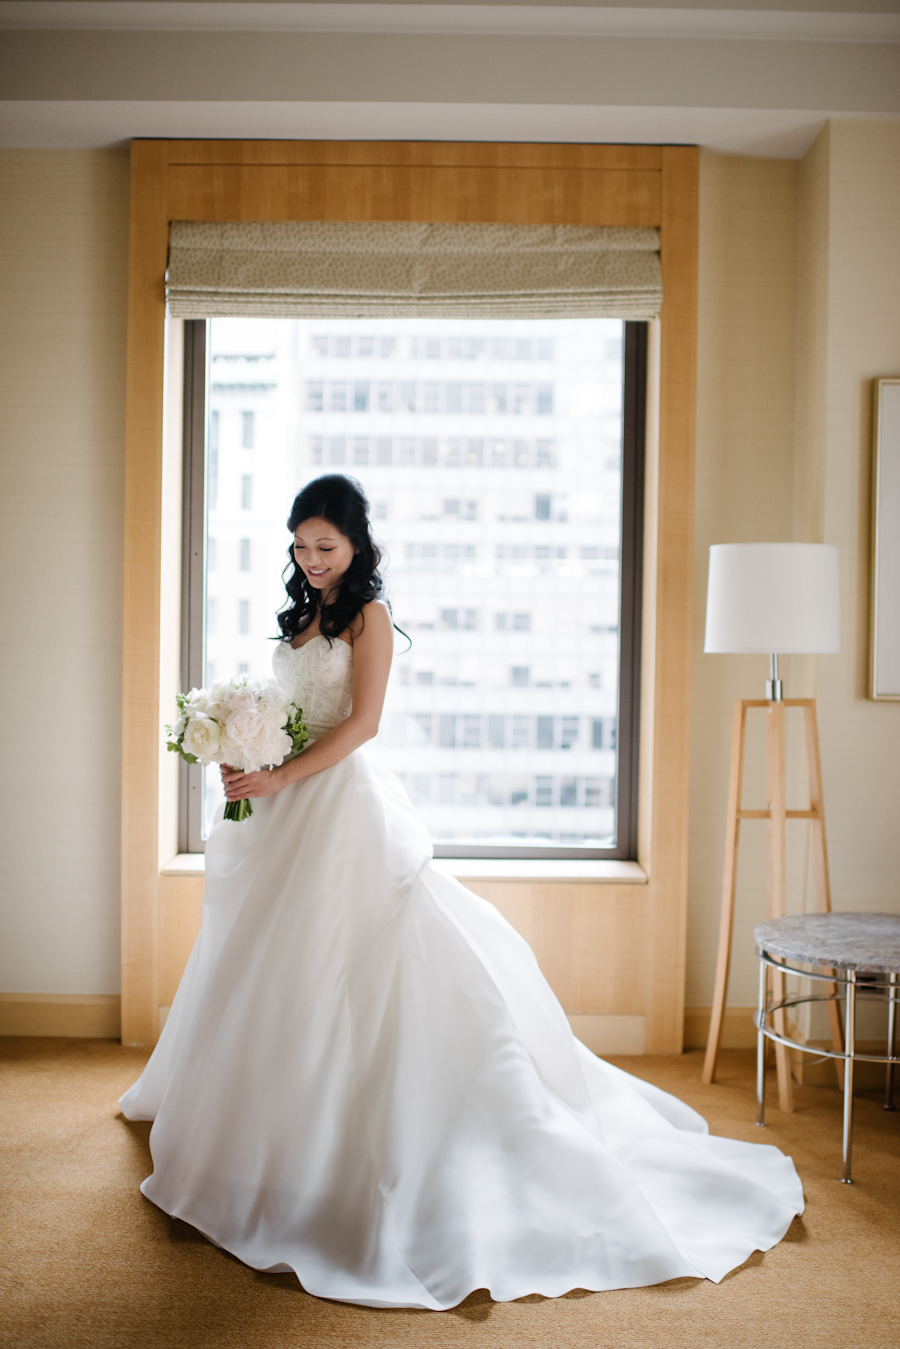 four seasons hotel wedding ang weddings and events brian hatton photography-10.jpg